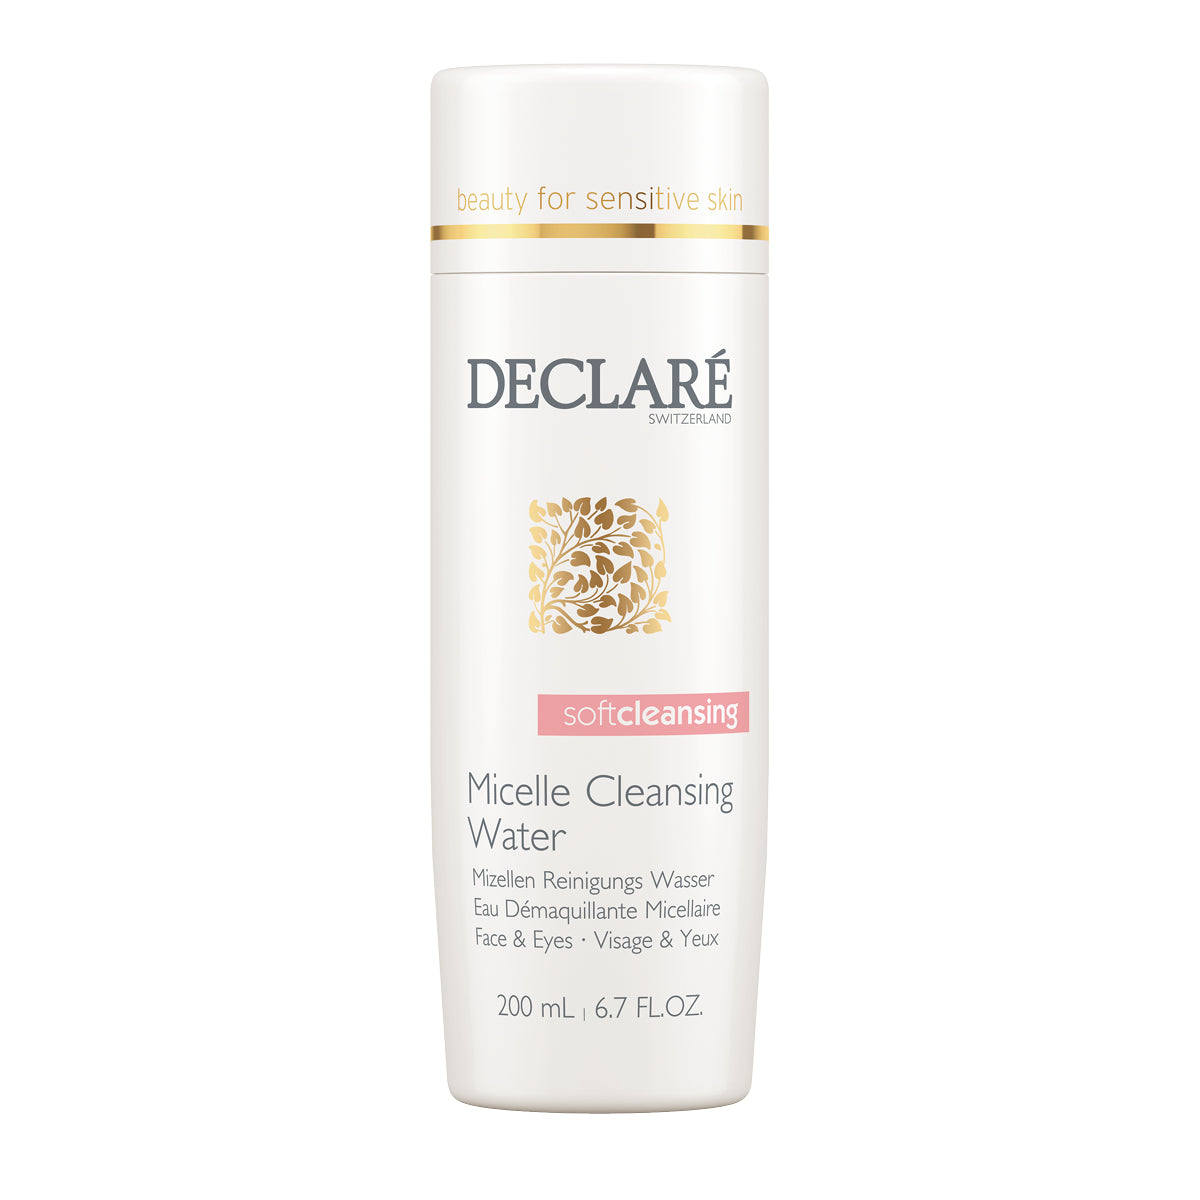 Micelle Cleansing Water 200ml